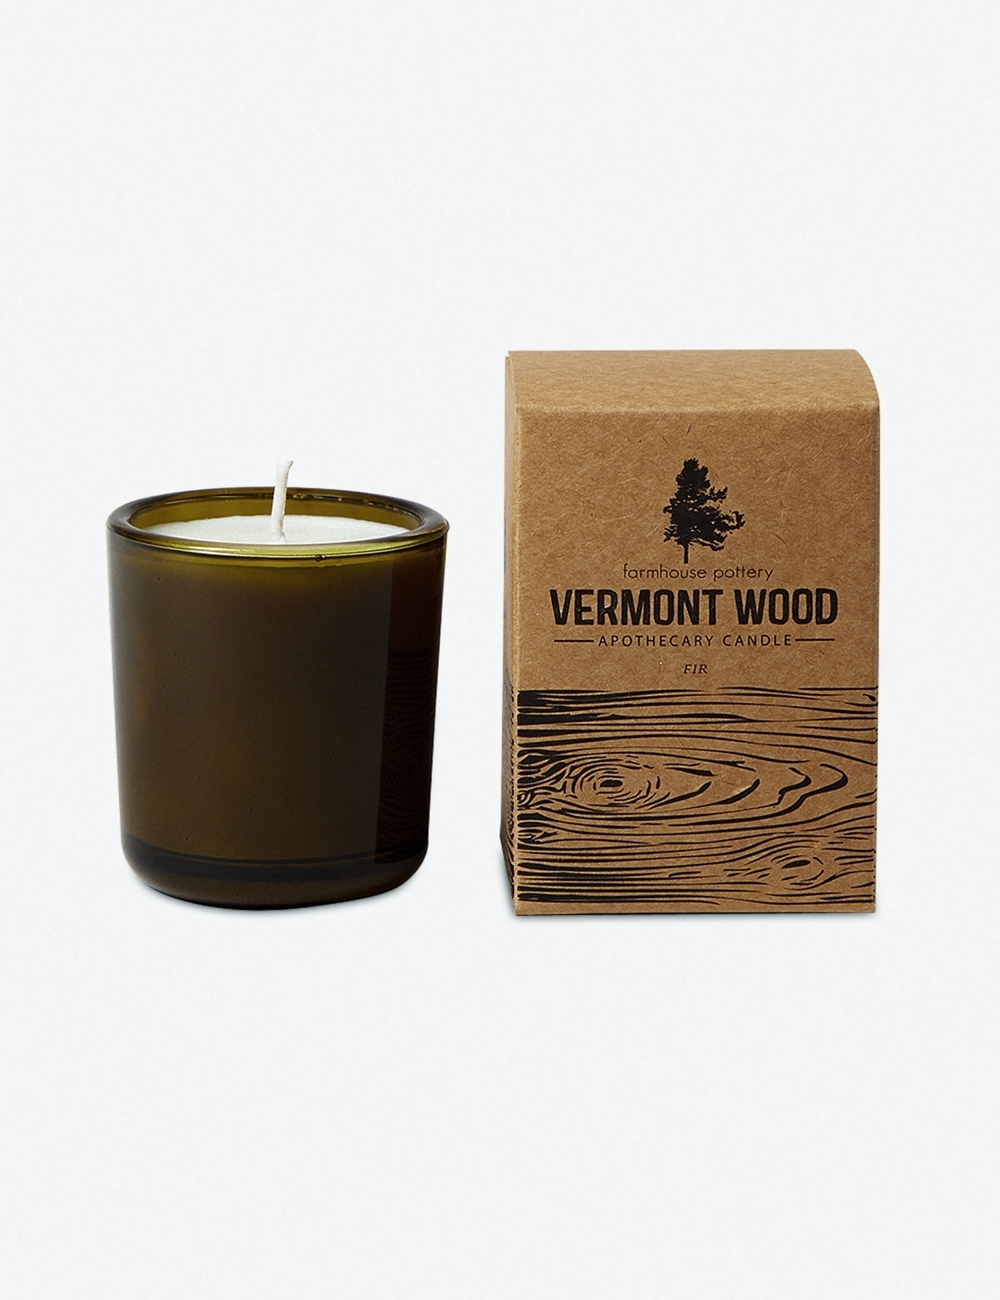 Vermont Wood Candle by Farmhouse Pottery - Image 0